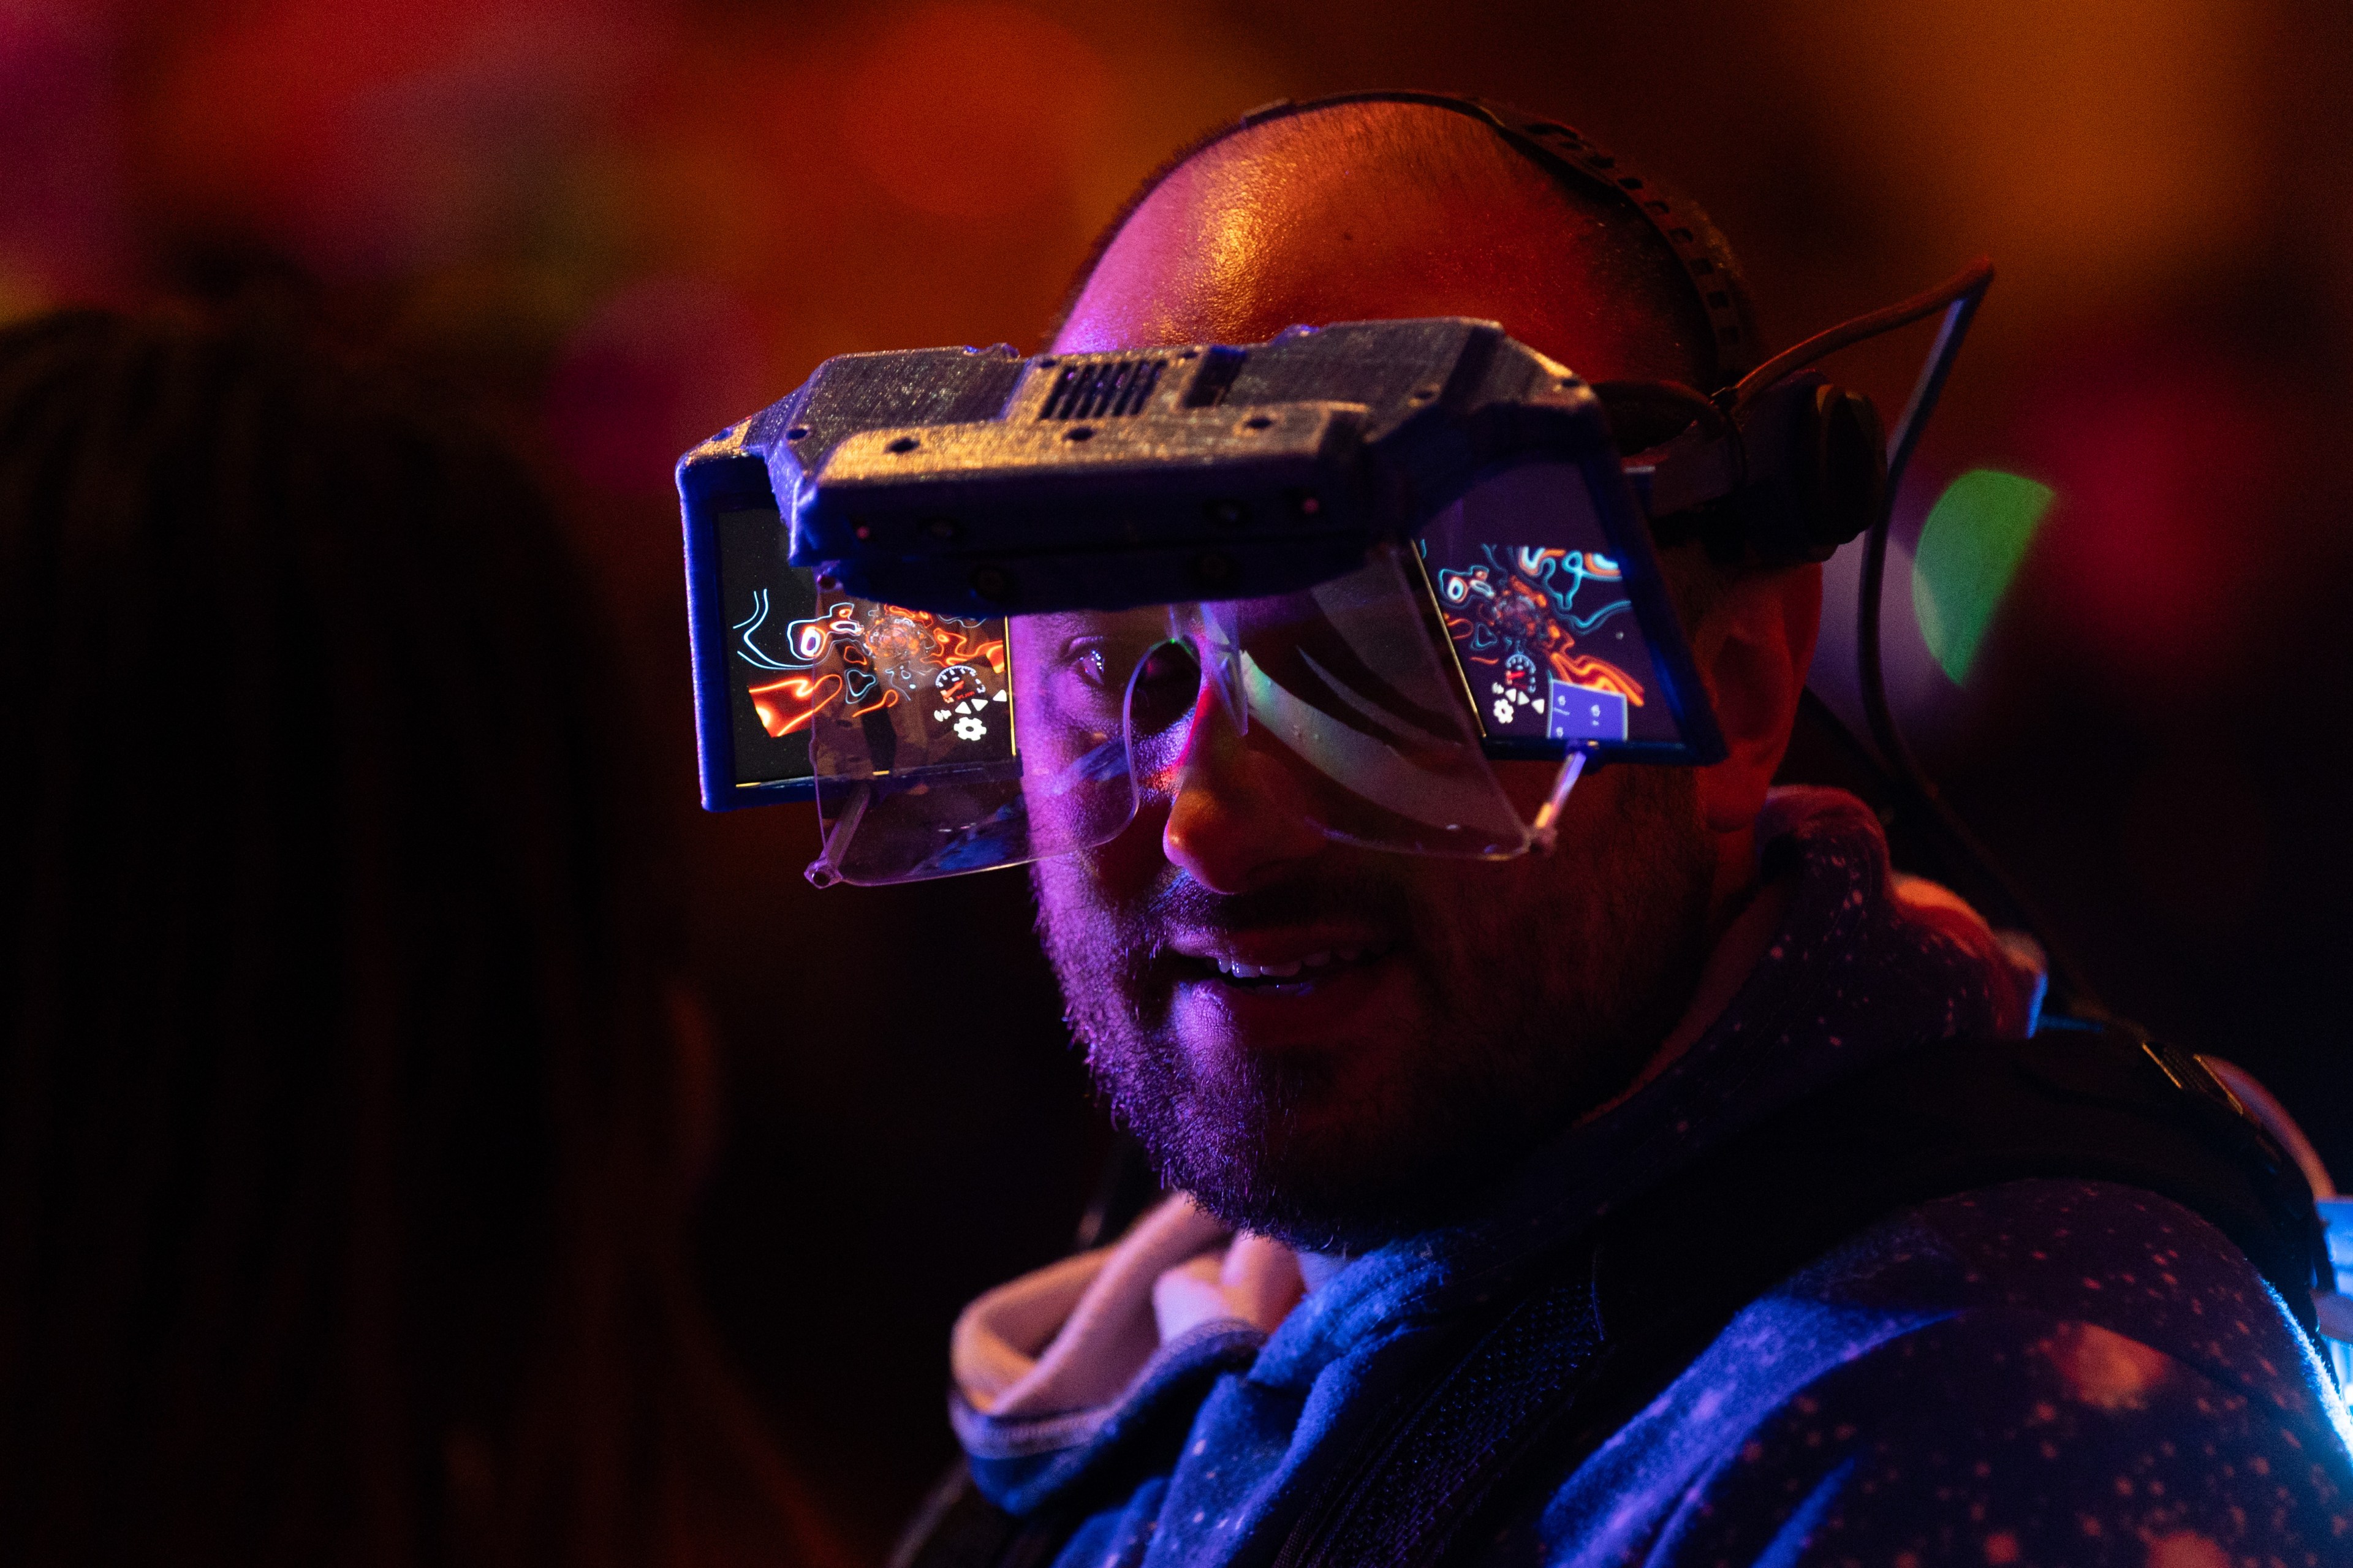 A person wearing futuristic, augmented reality glasses is depicted, with colorful graphics reflecting on the lenses, bathed in vibrant, multicolored lighting.